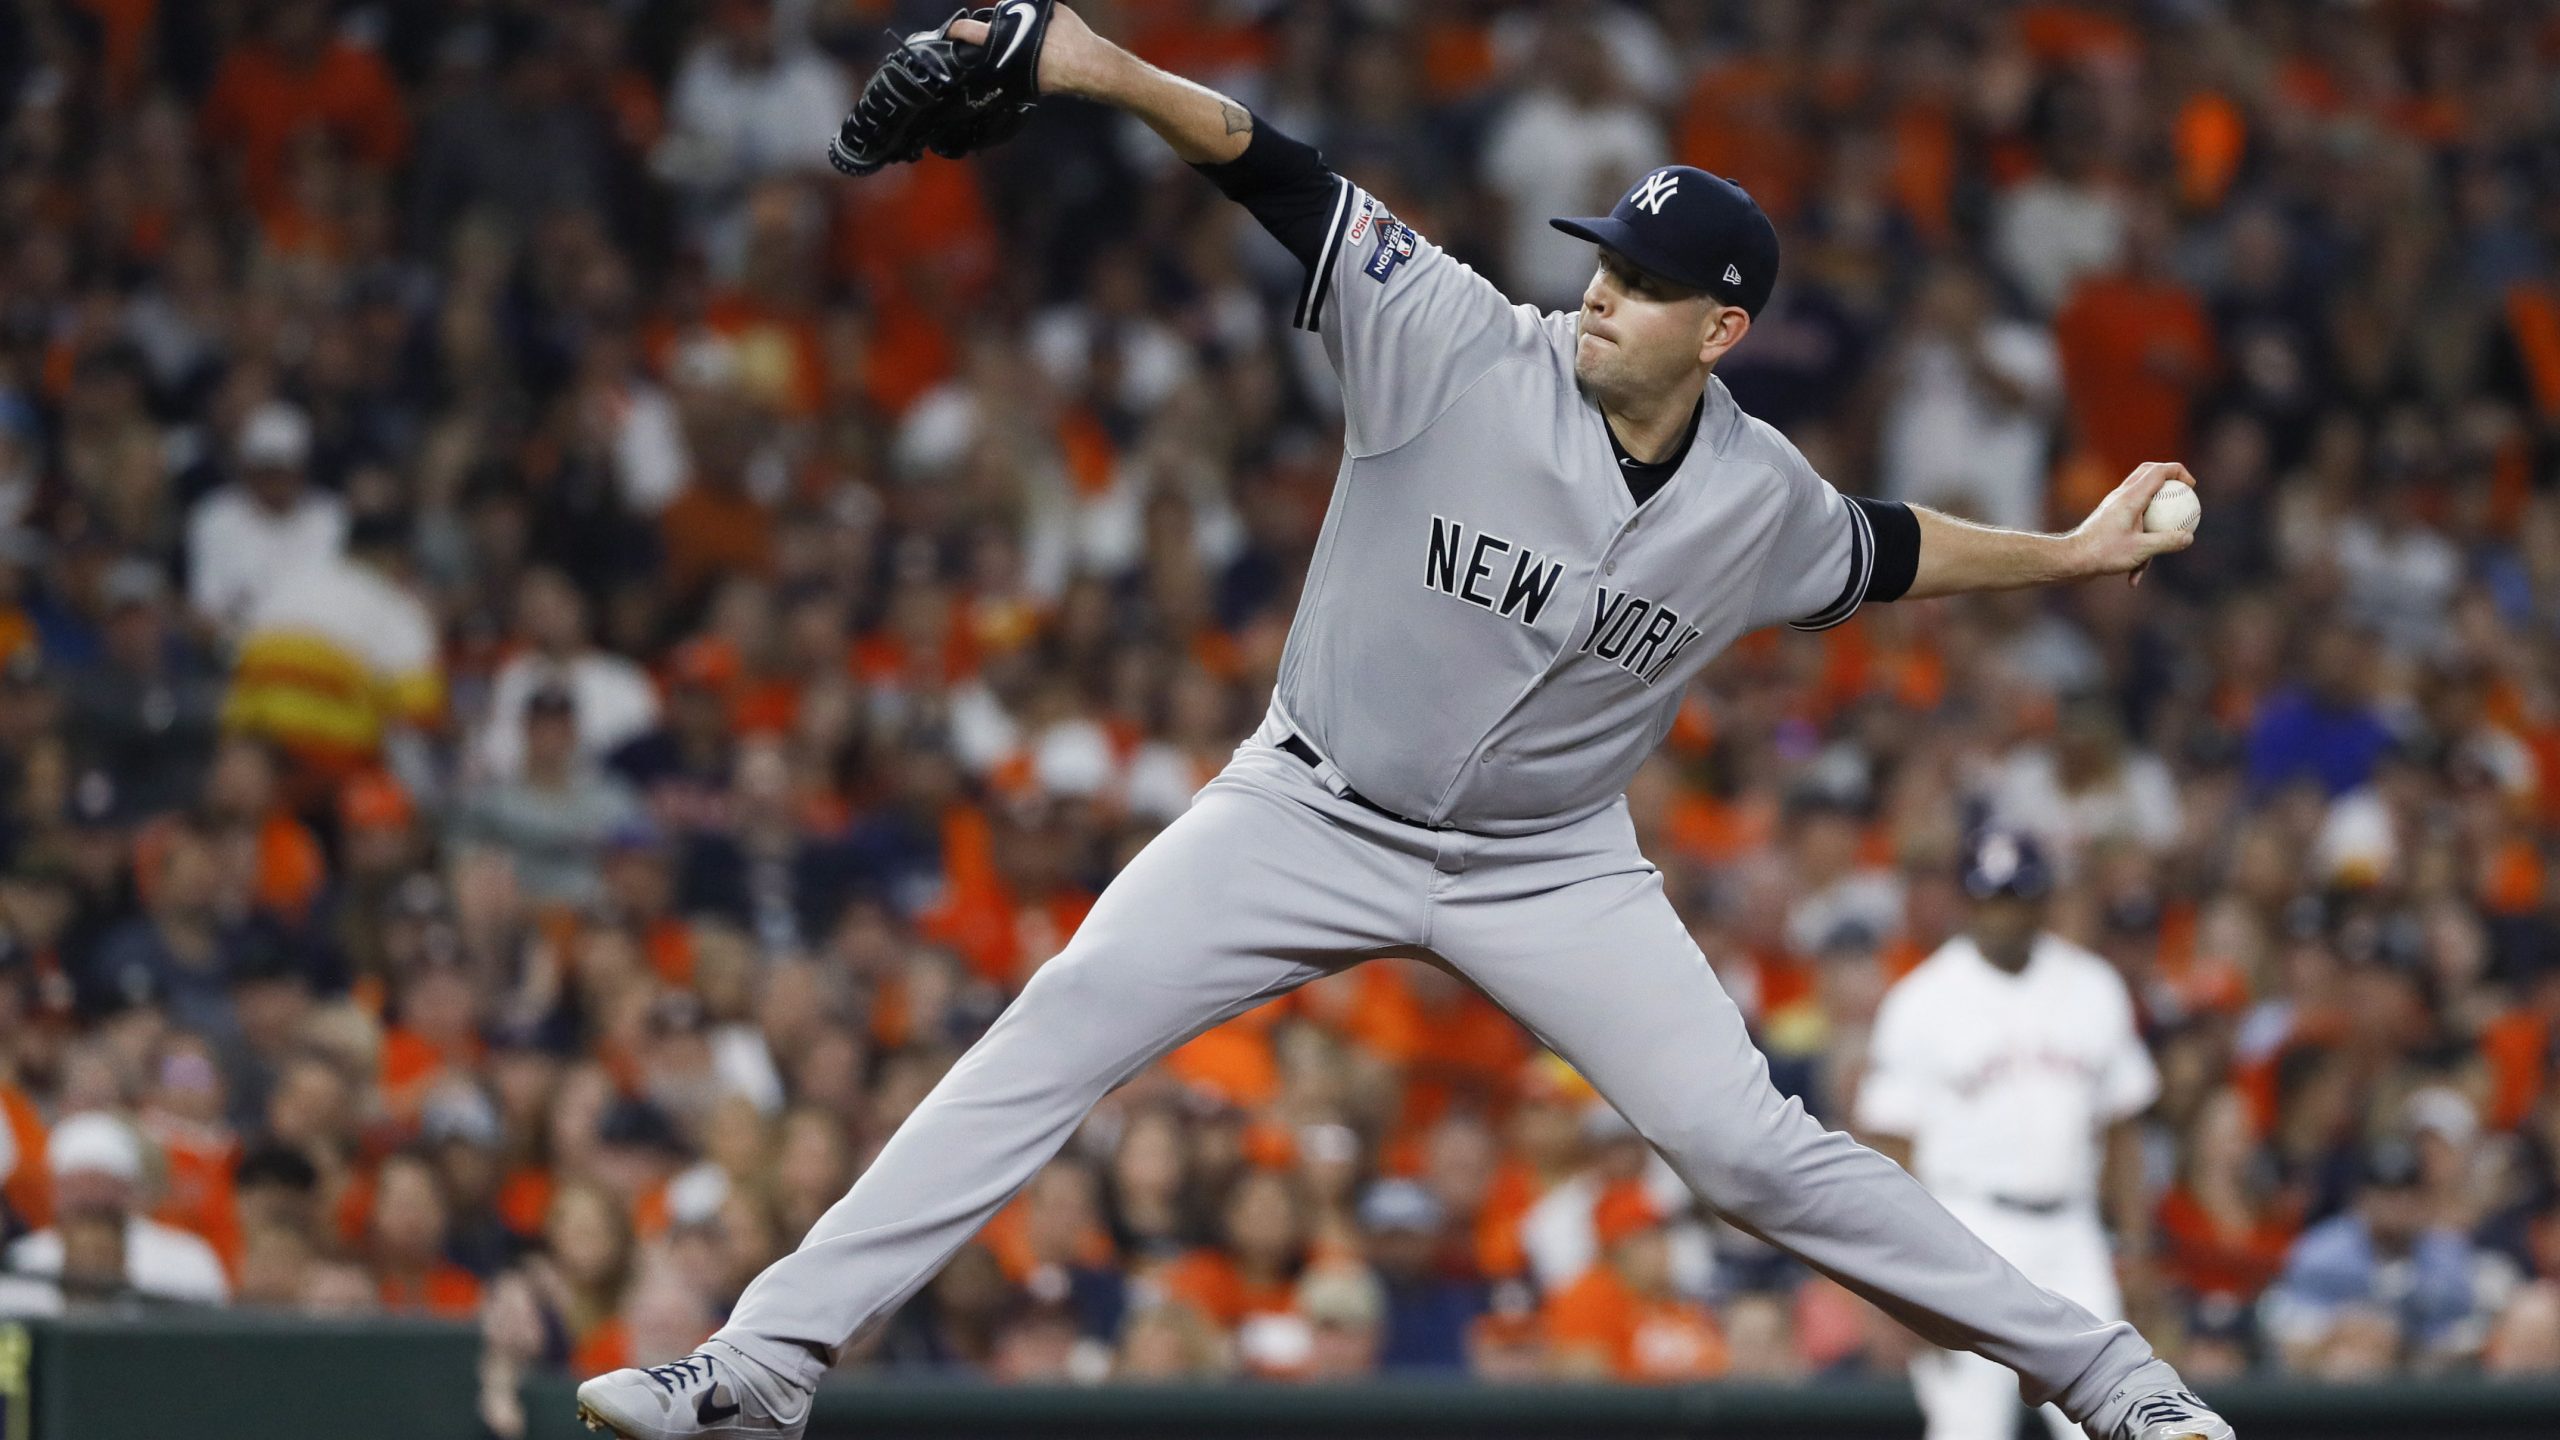 Yankees agree to deals with Aaron Judge, James Paxton and Gary Sanchez